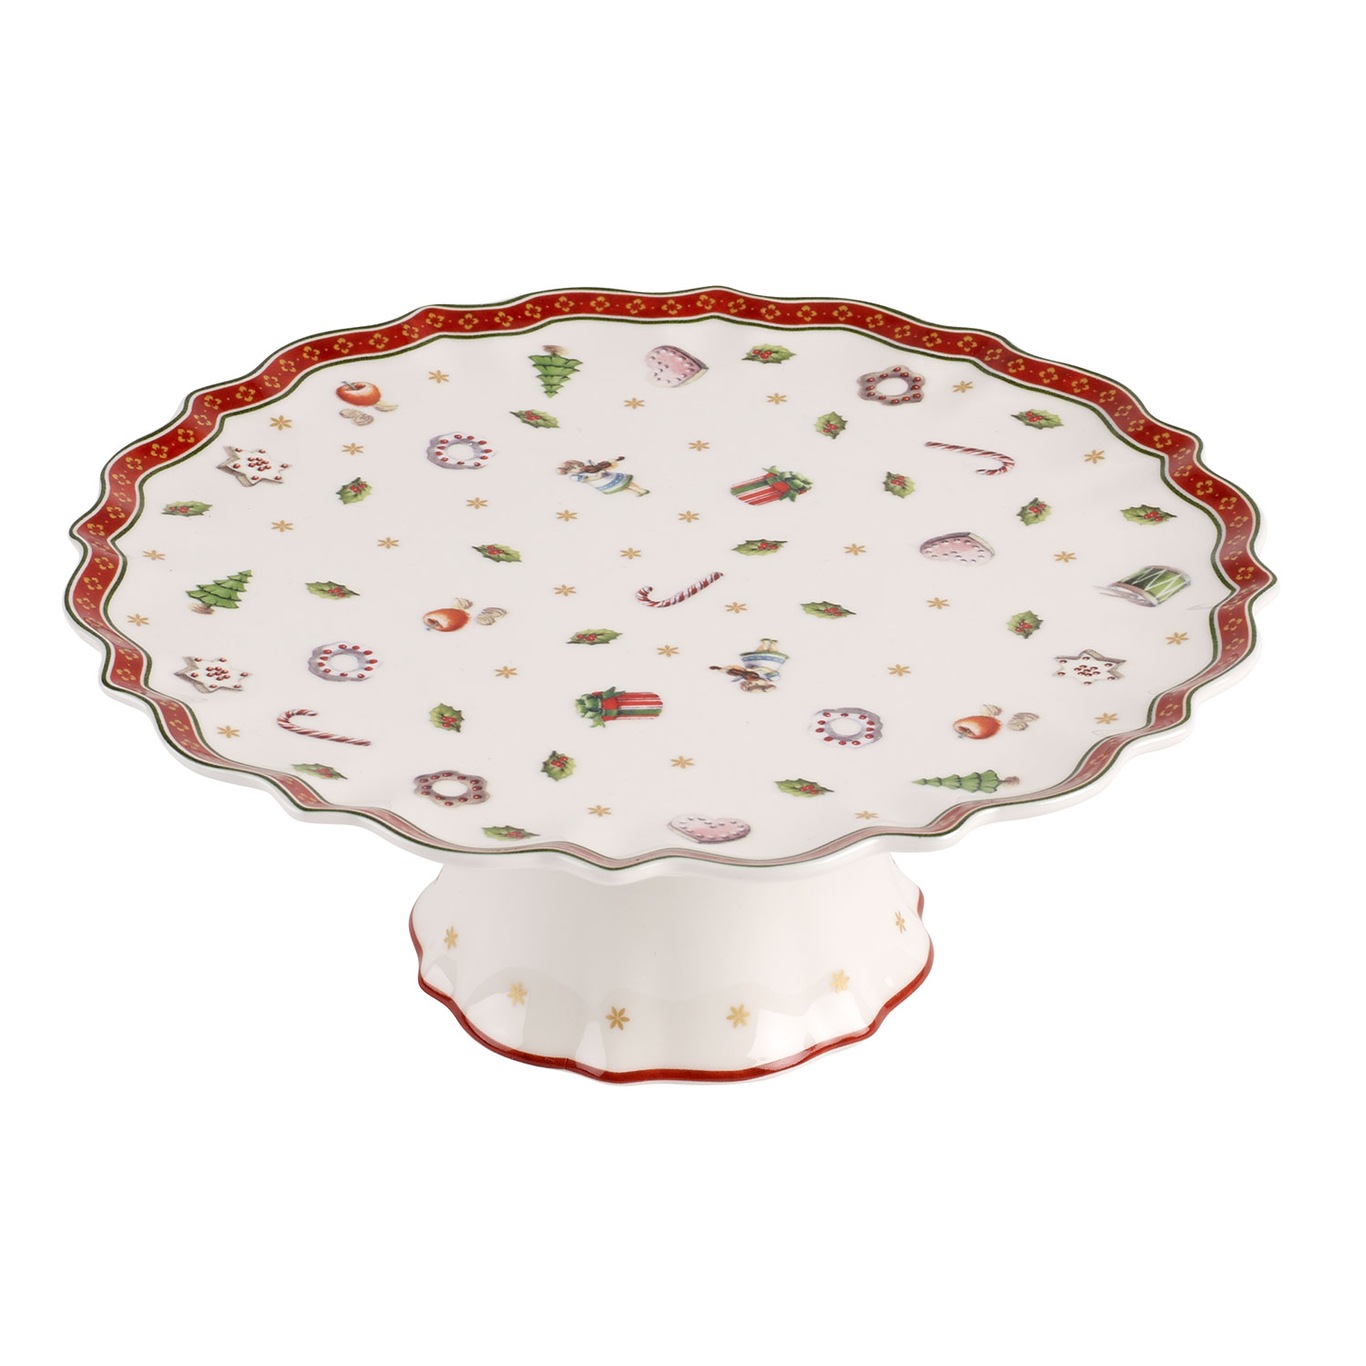 Toy's Delight Cake Plate, 21 cm